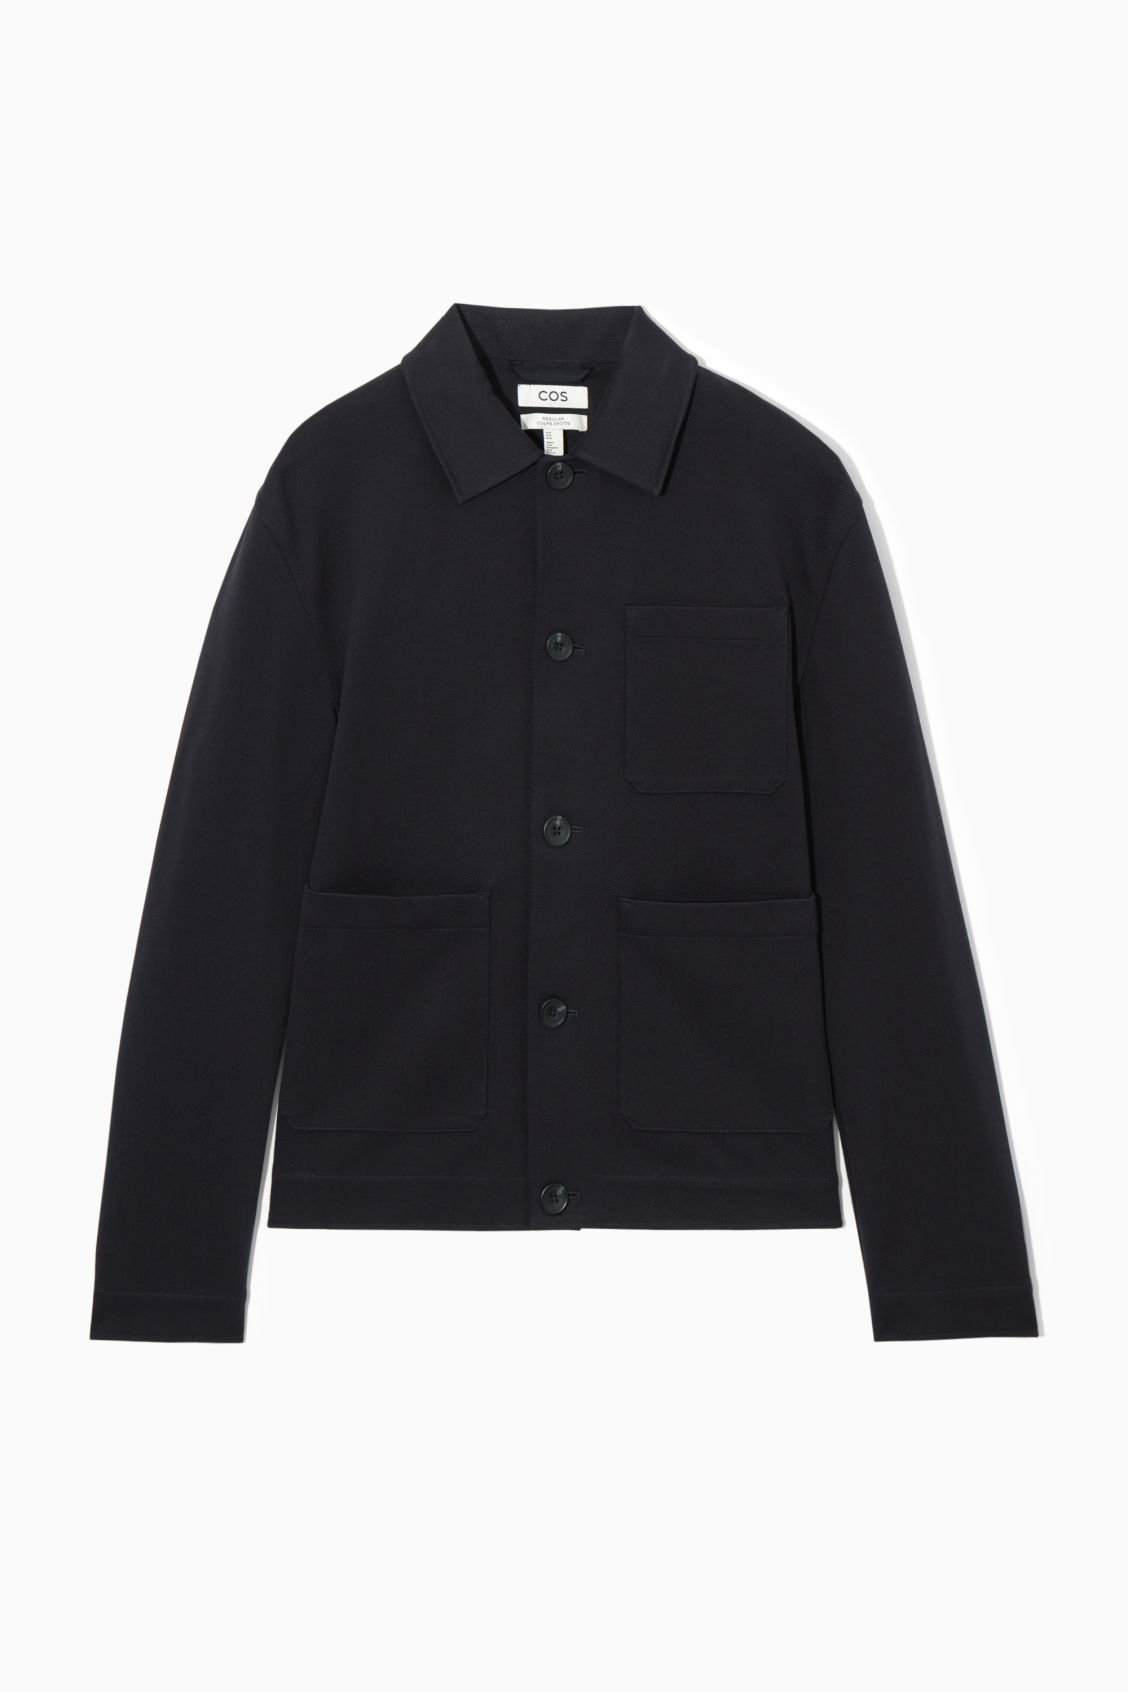 COS Cotton-Twill Utility Jacket in NAVY | Endource